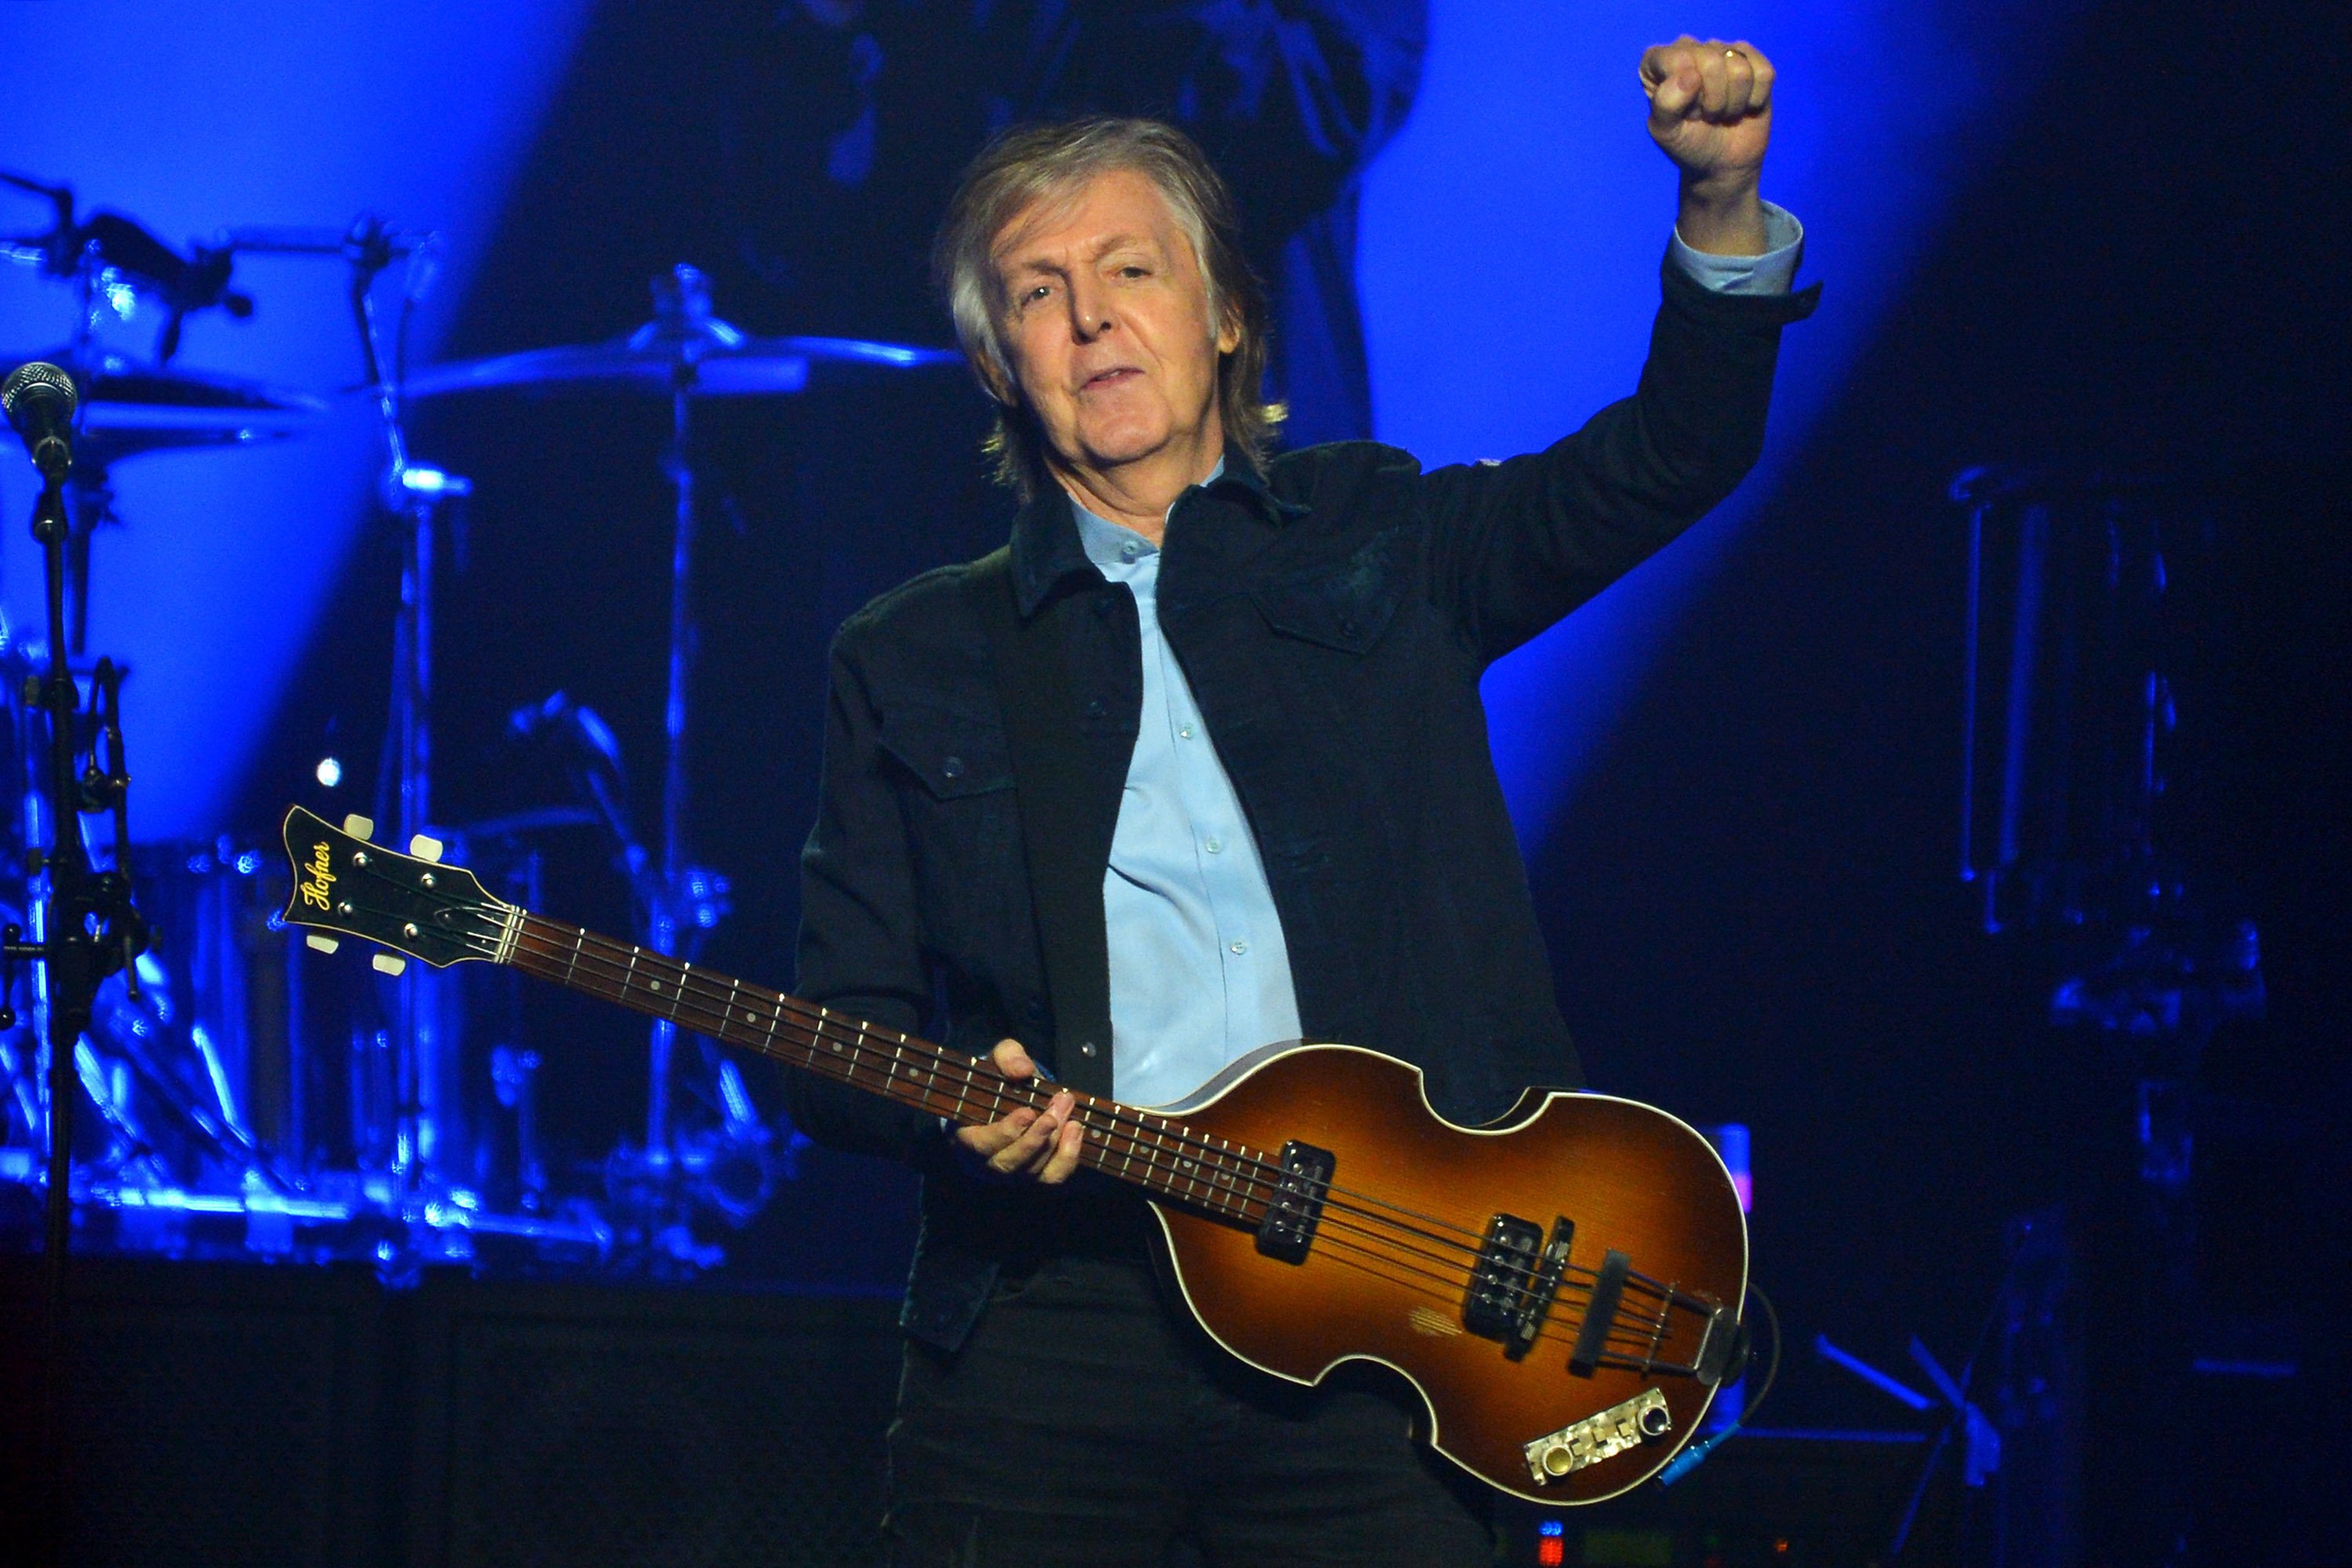 Paul McCartney performs on stage at the O2 Arena during his 'Freshen Up' tour in London, England